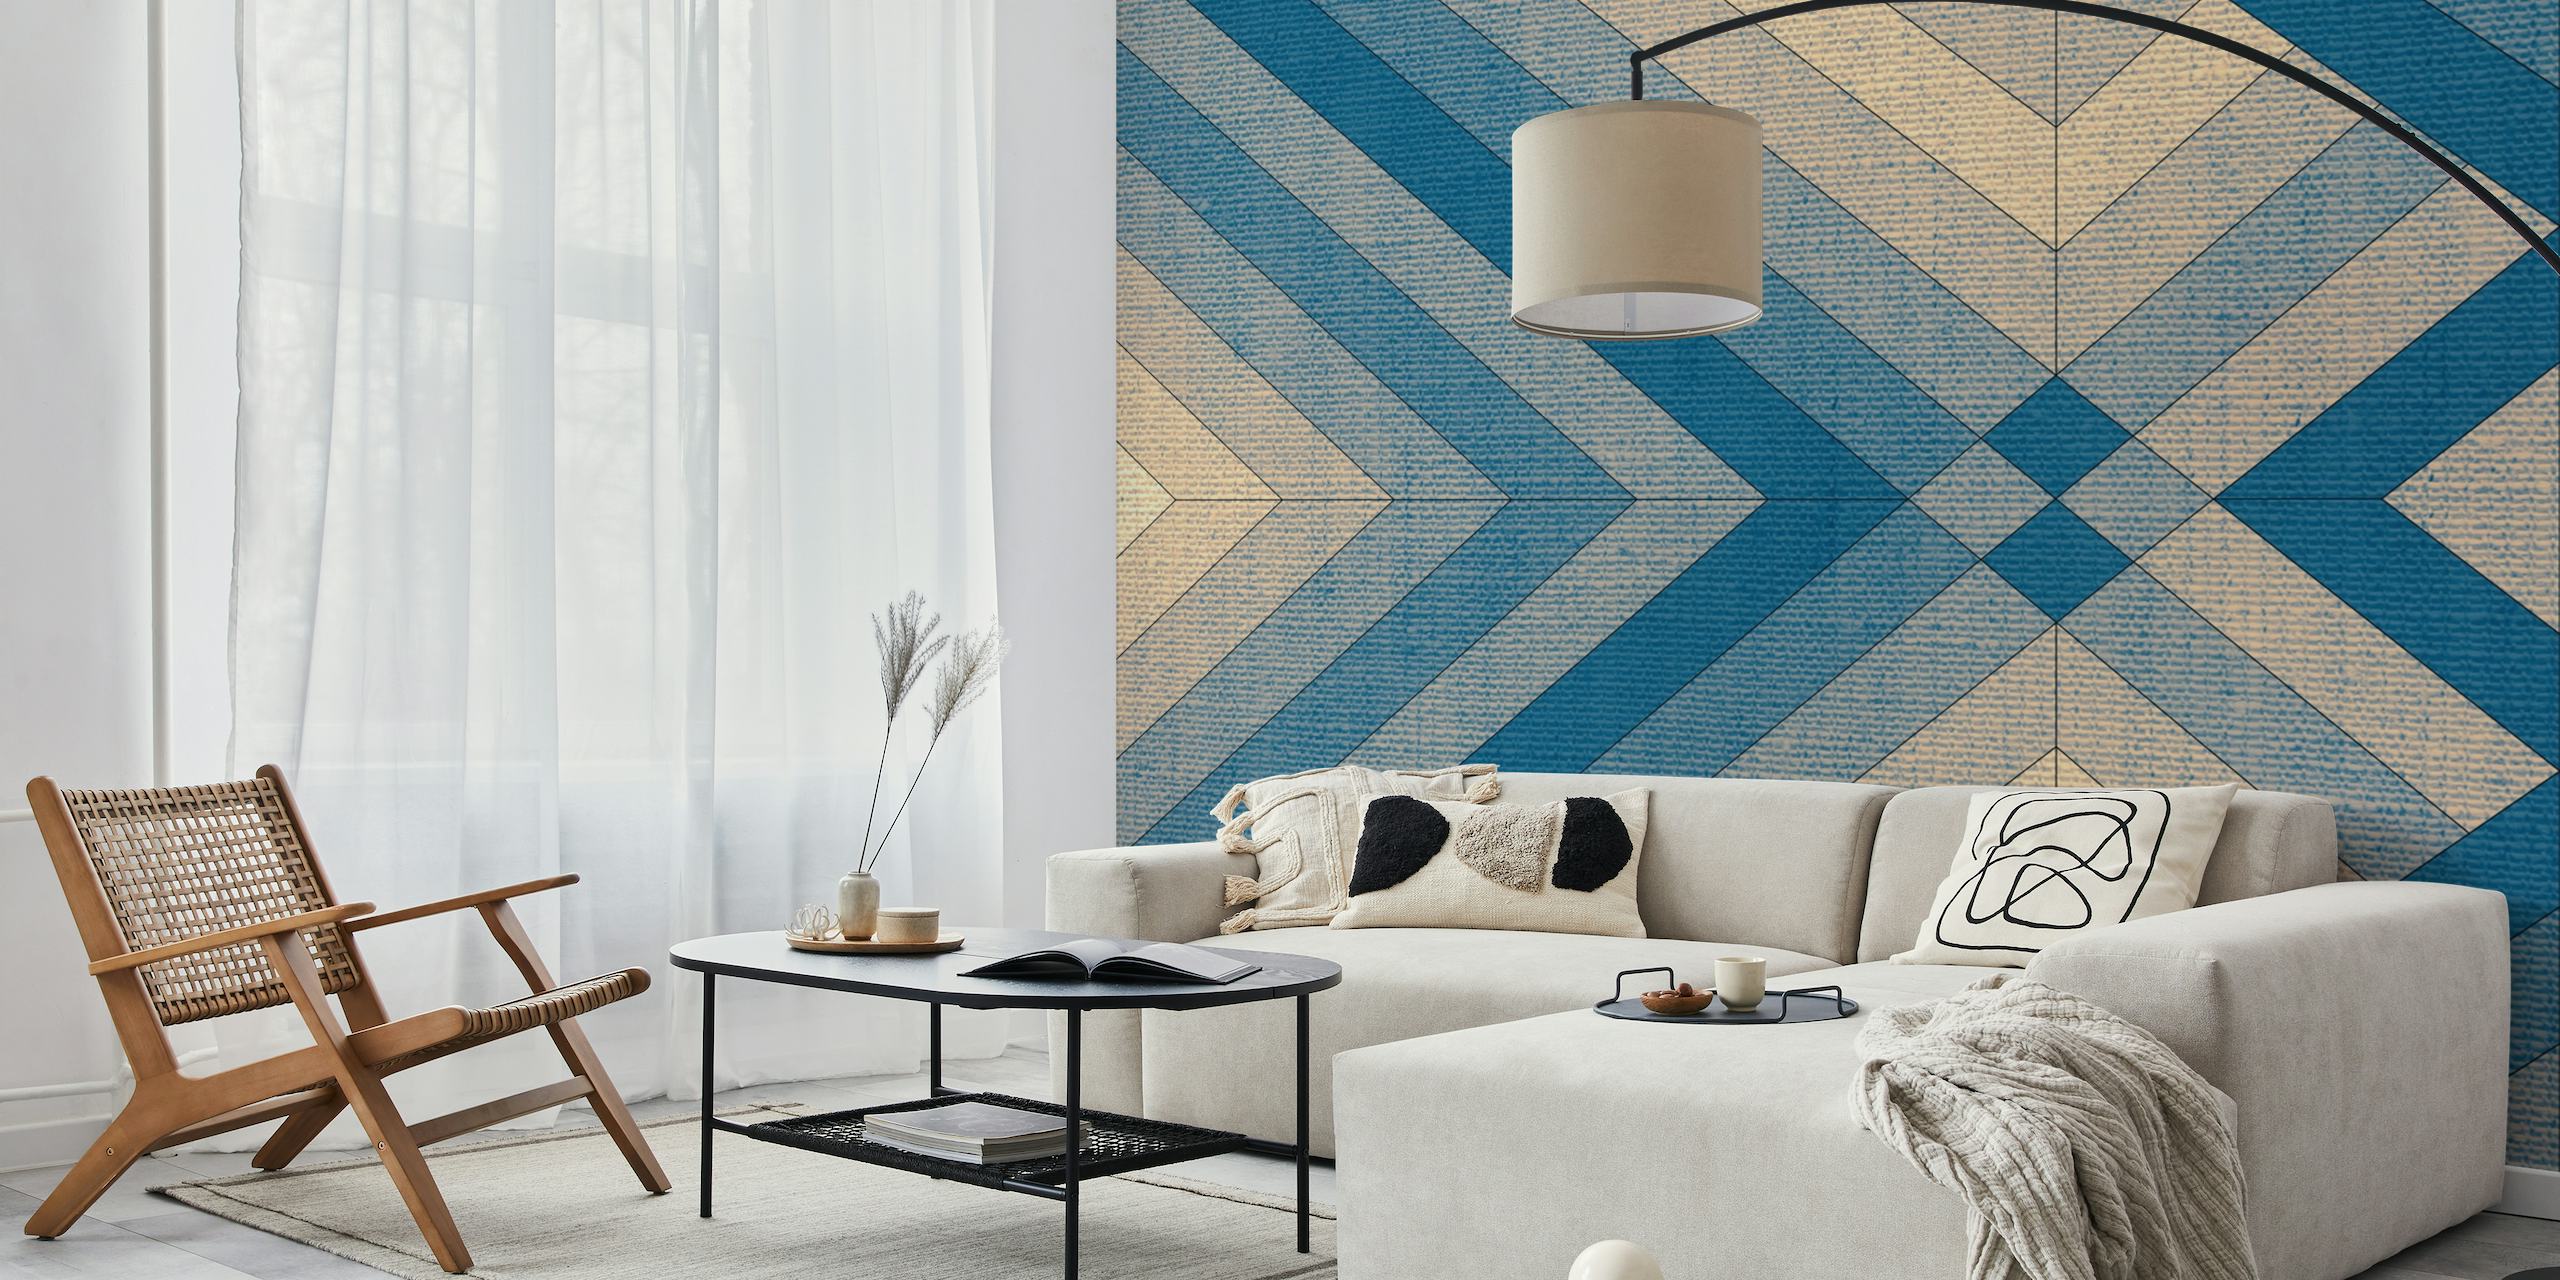 Geometric pattern wall mural with a textile-like texture in shades of blue and beige